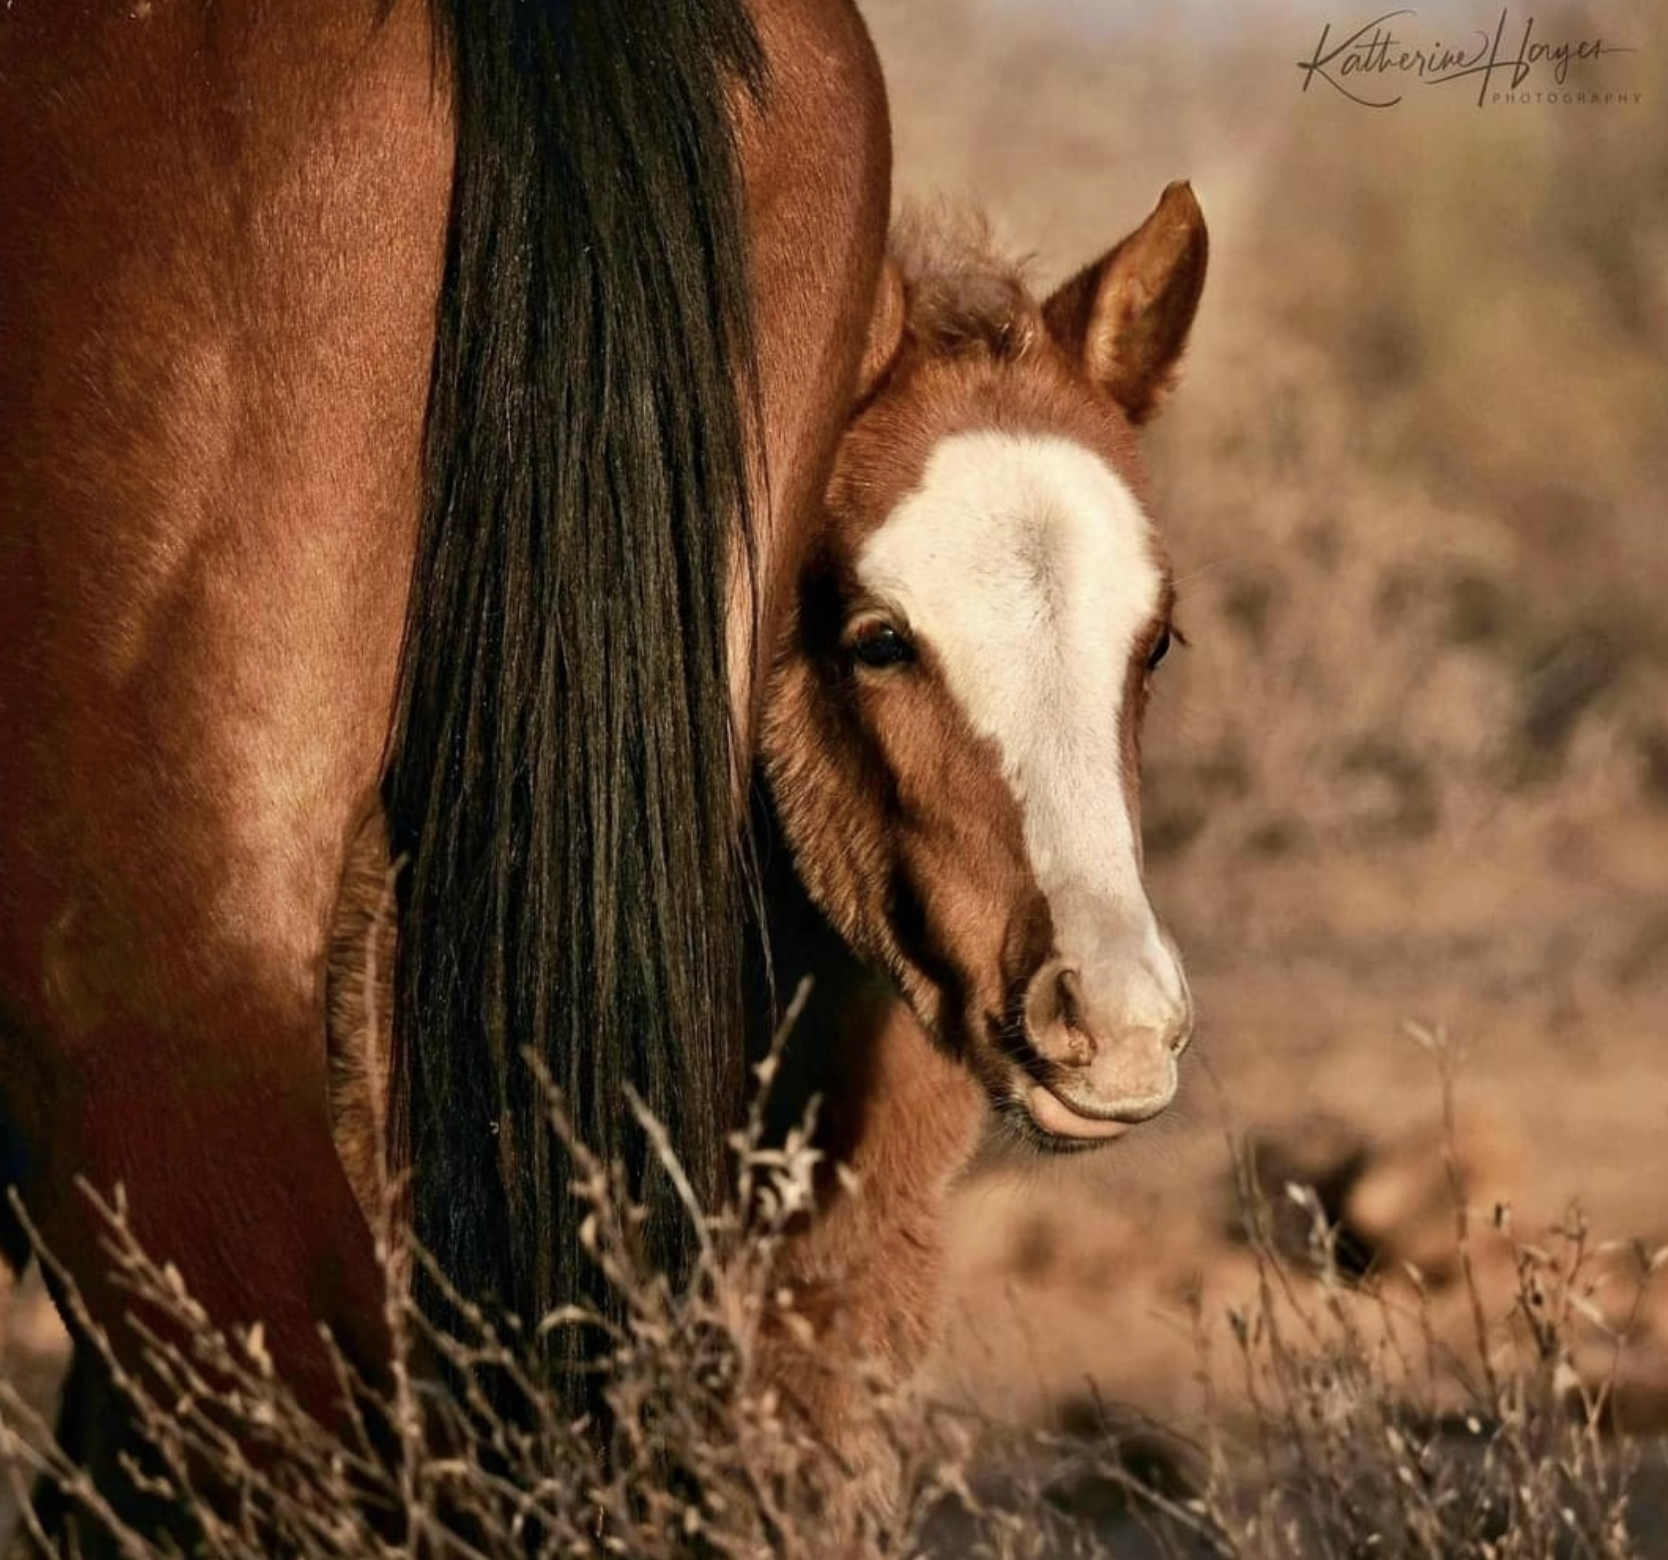 The last foal of 2020, born on November 10th